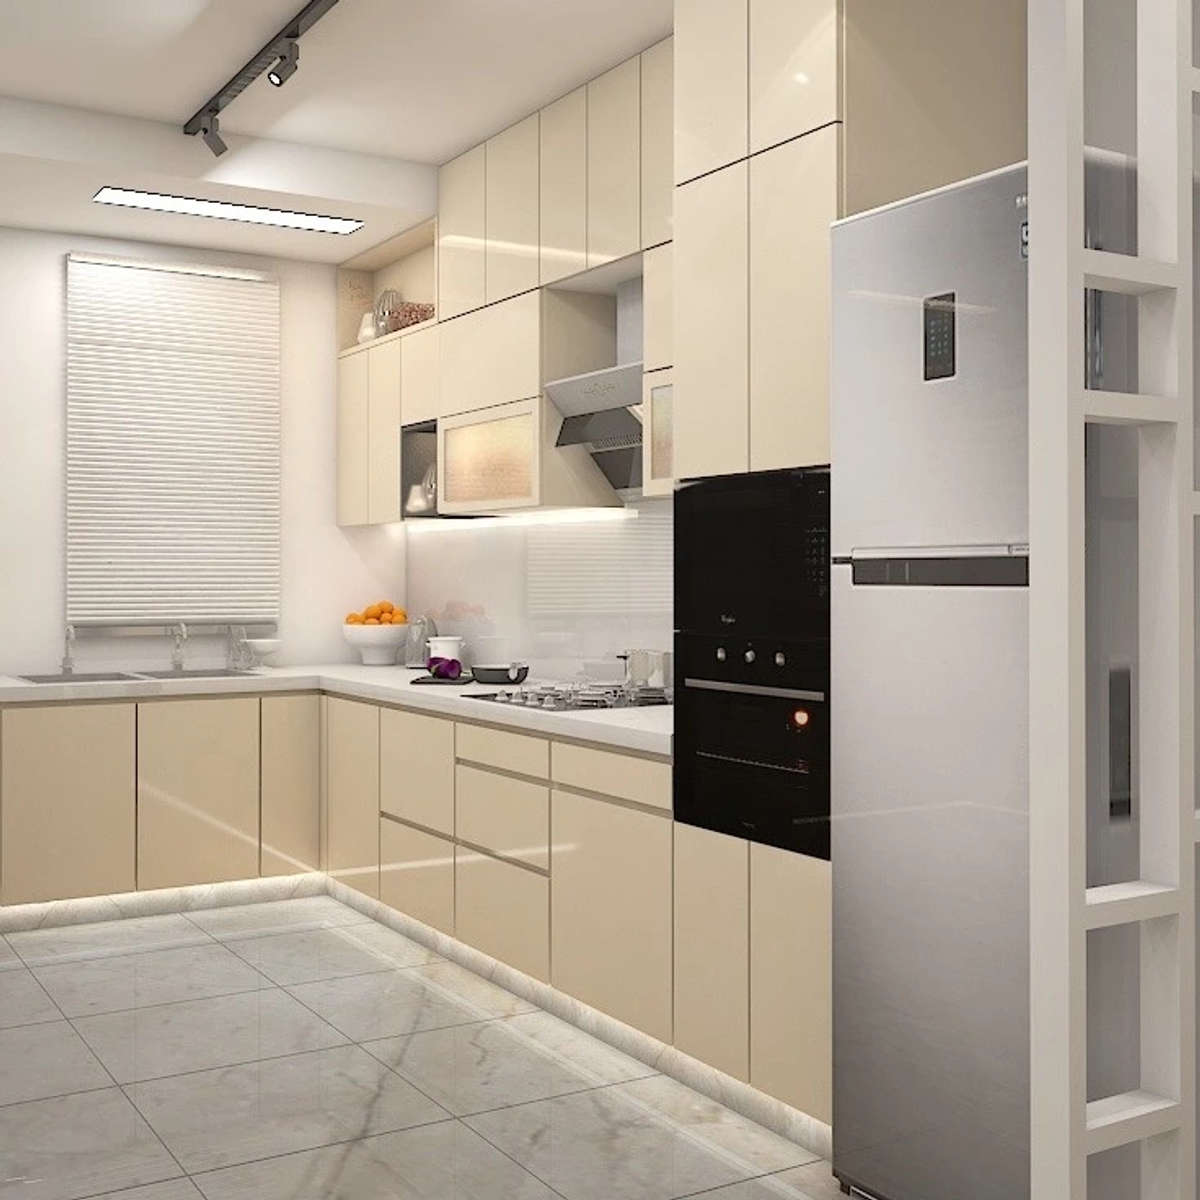 We have created a 3d model of the modular kitchen.
#ModularKitchen